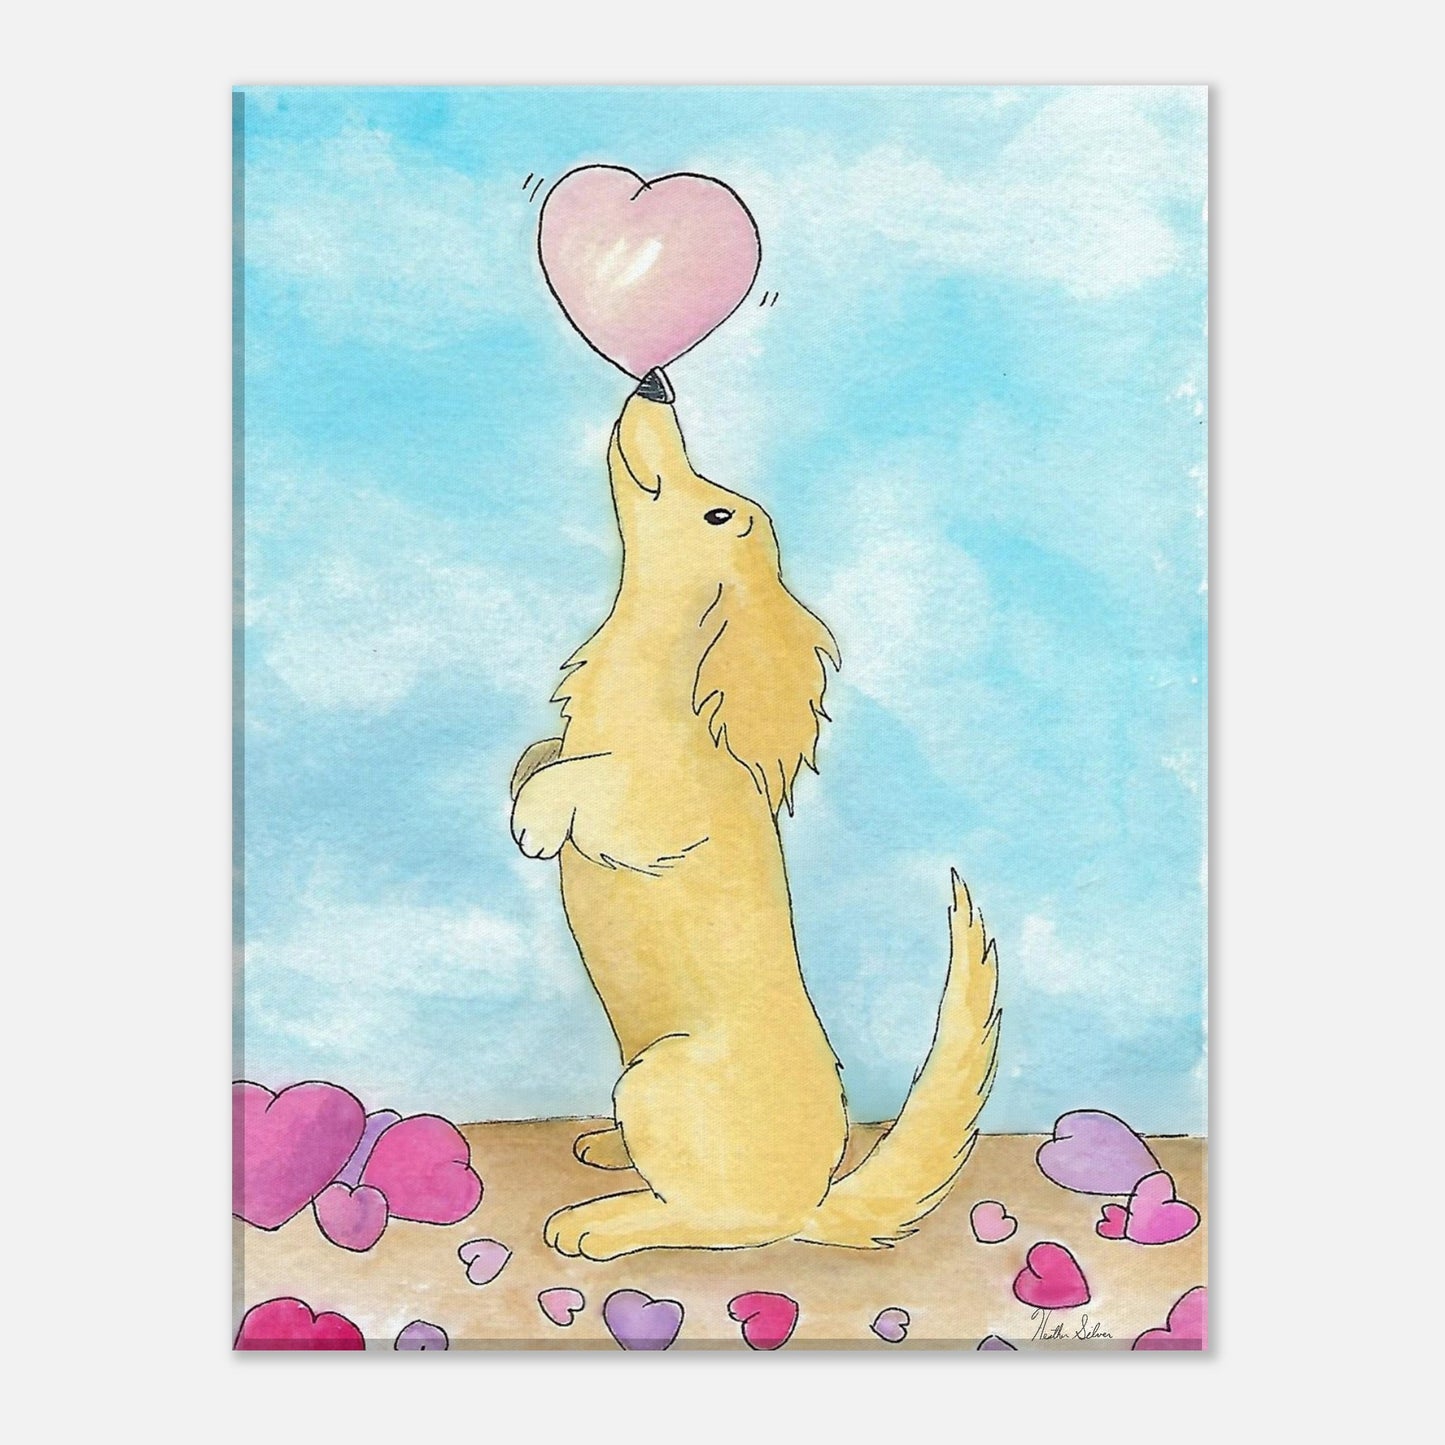 12 by 16 inch canvas wall art print of Heather Silver's watercolor painting, Puppy Love. It features a cute dog balancing a pink heart on its nose against a blue sky background.